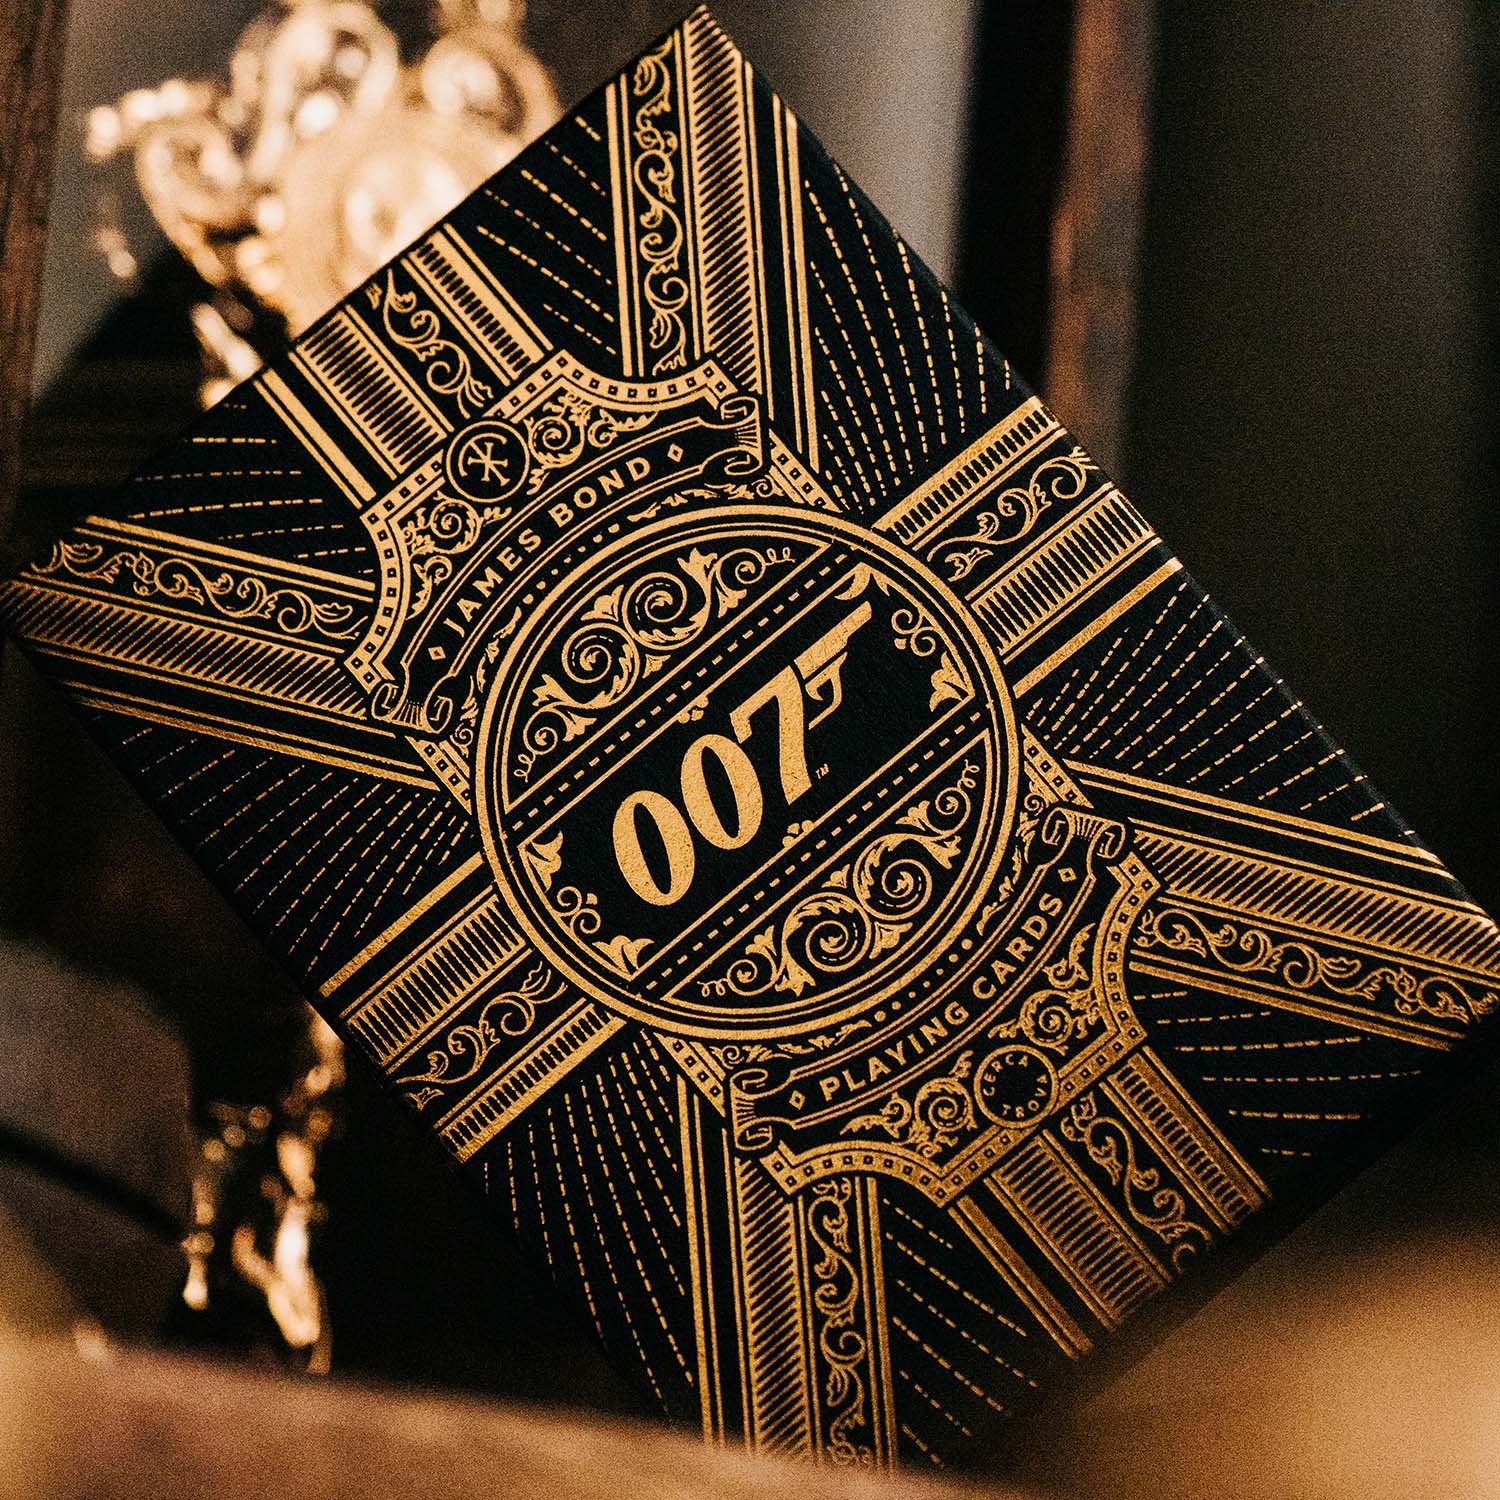 JAMES BOND PLAYING CARDS BY THEORY 11